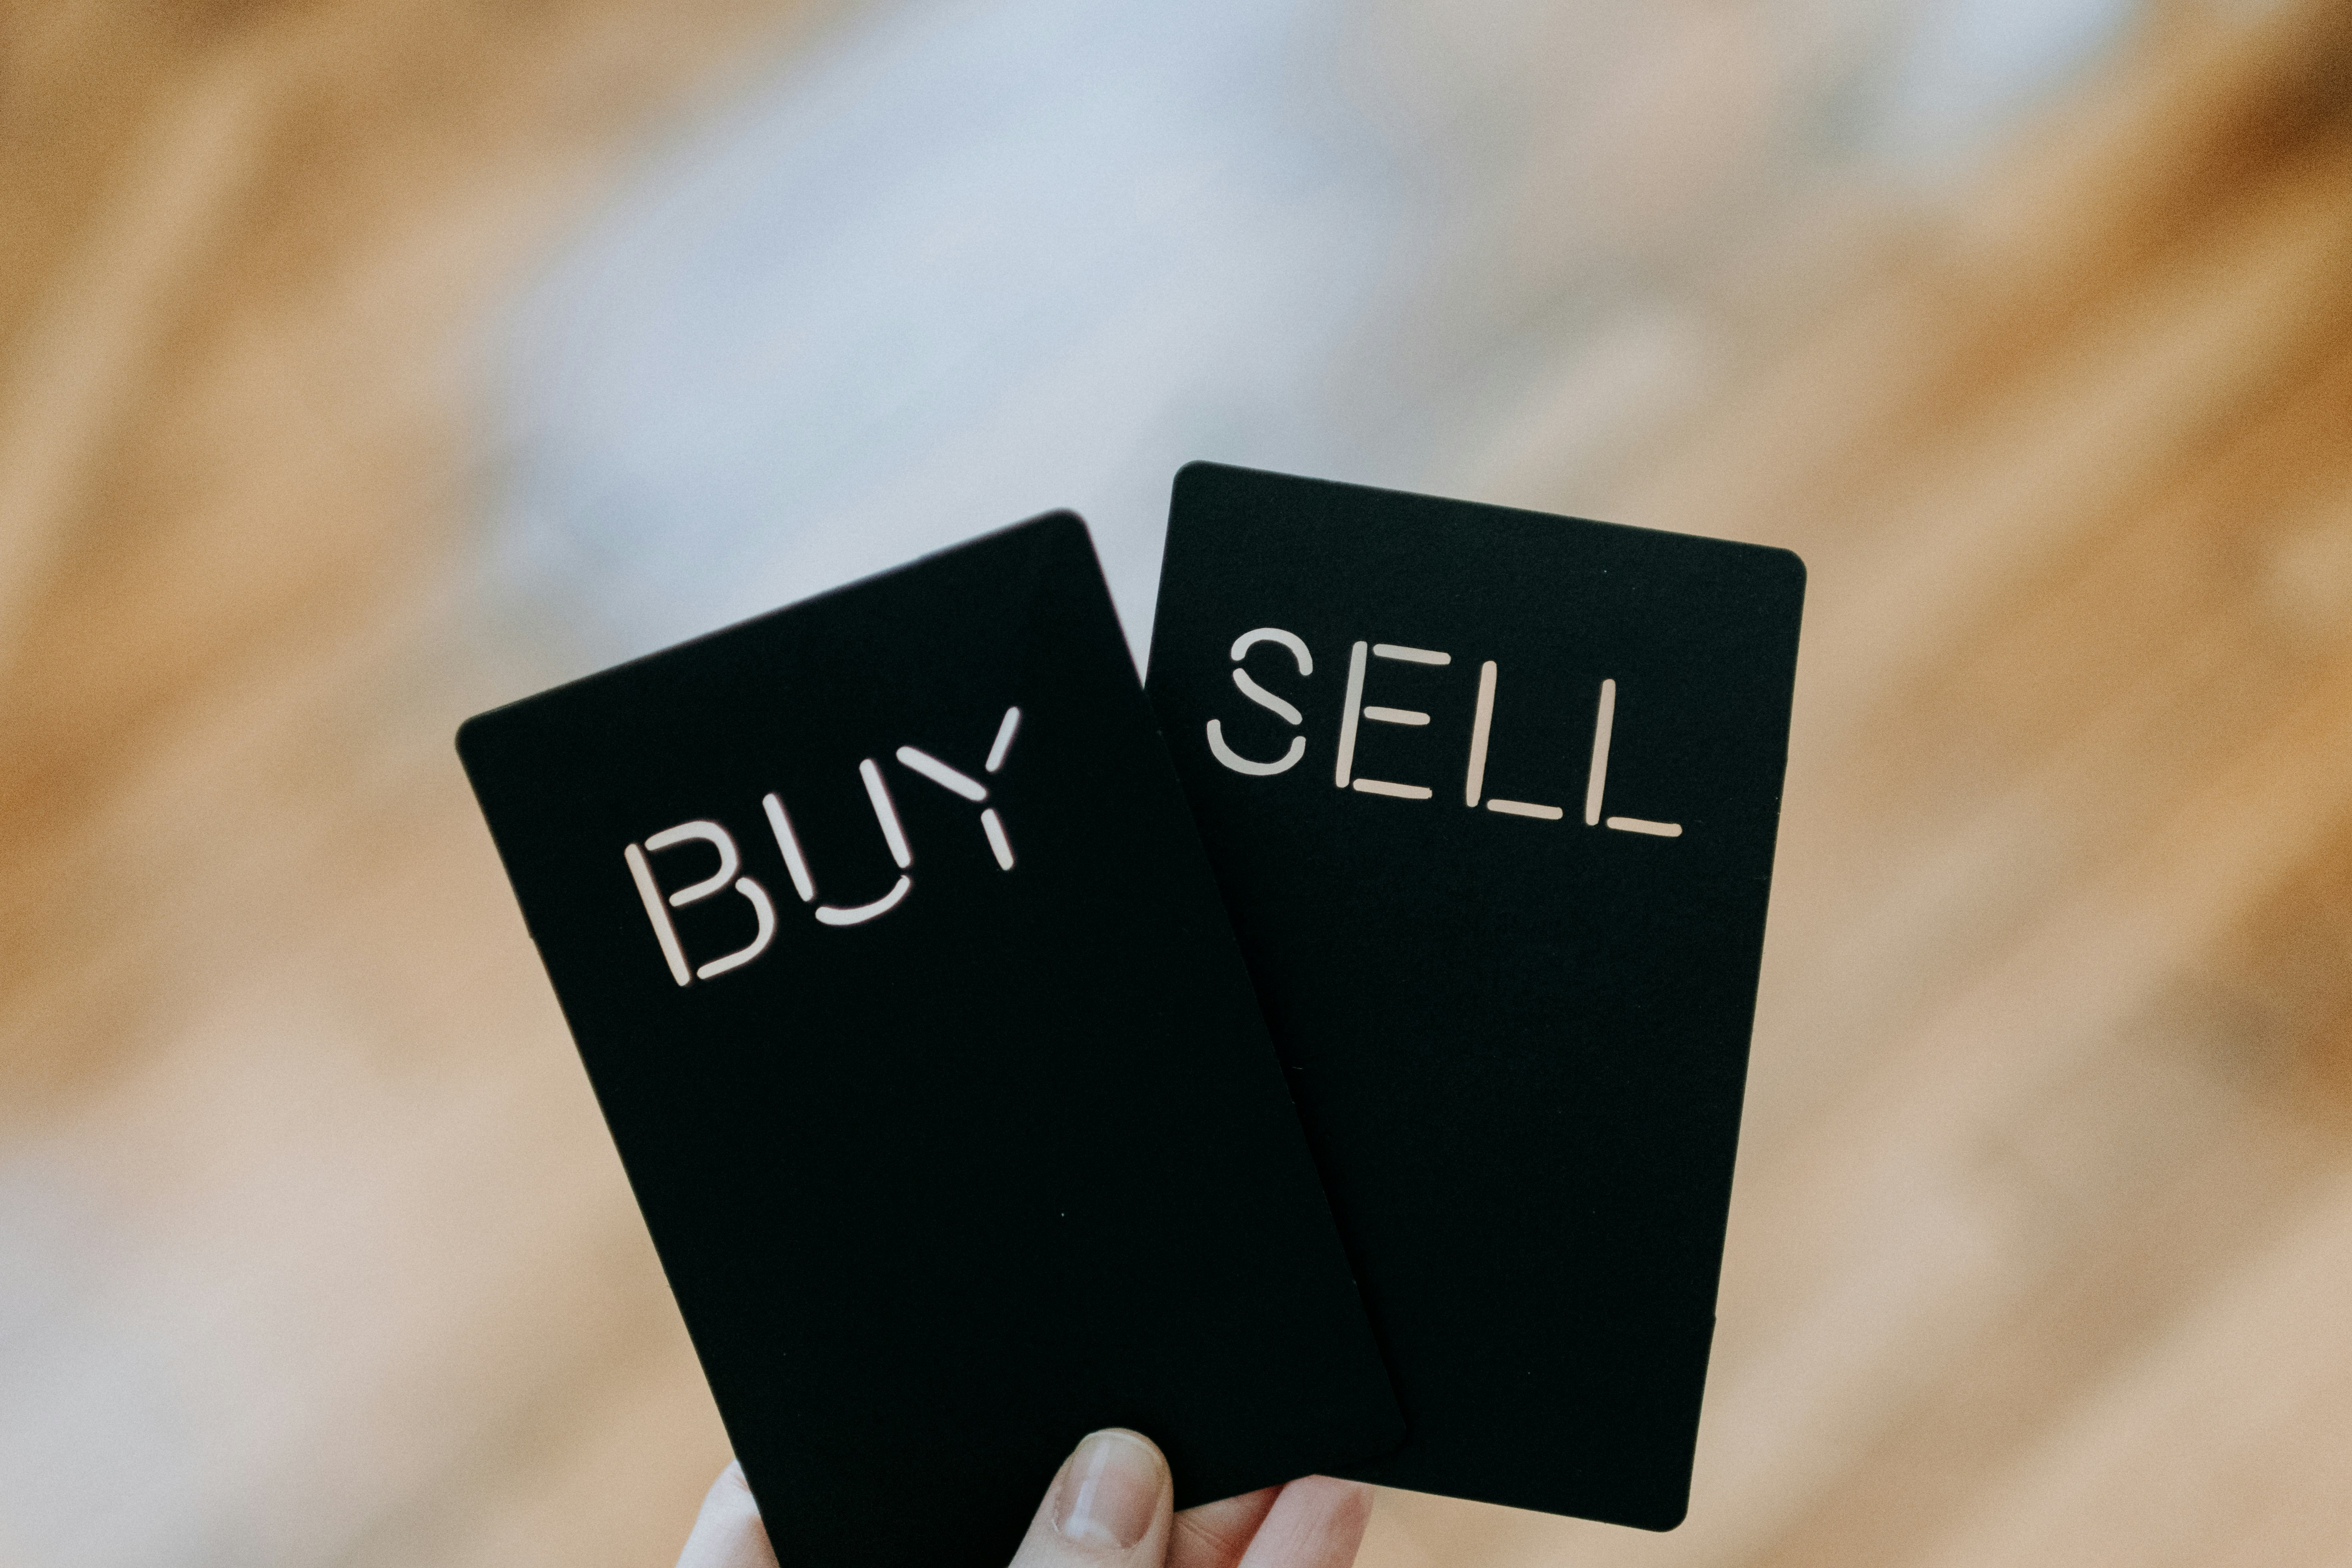 Sell In & Sell Out: two extremely important concepts in the retail industry.